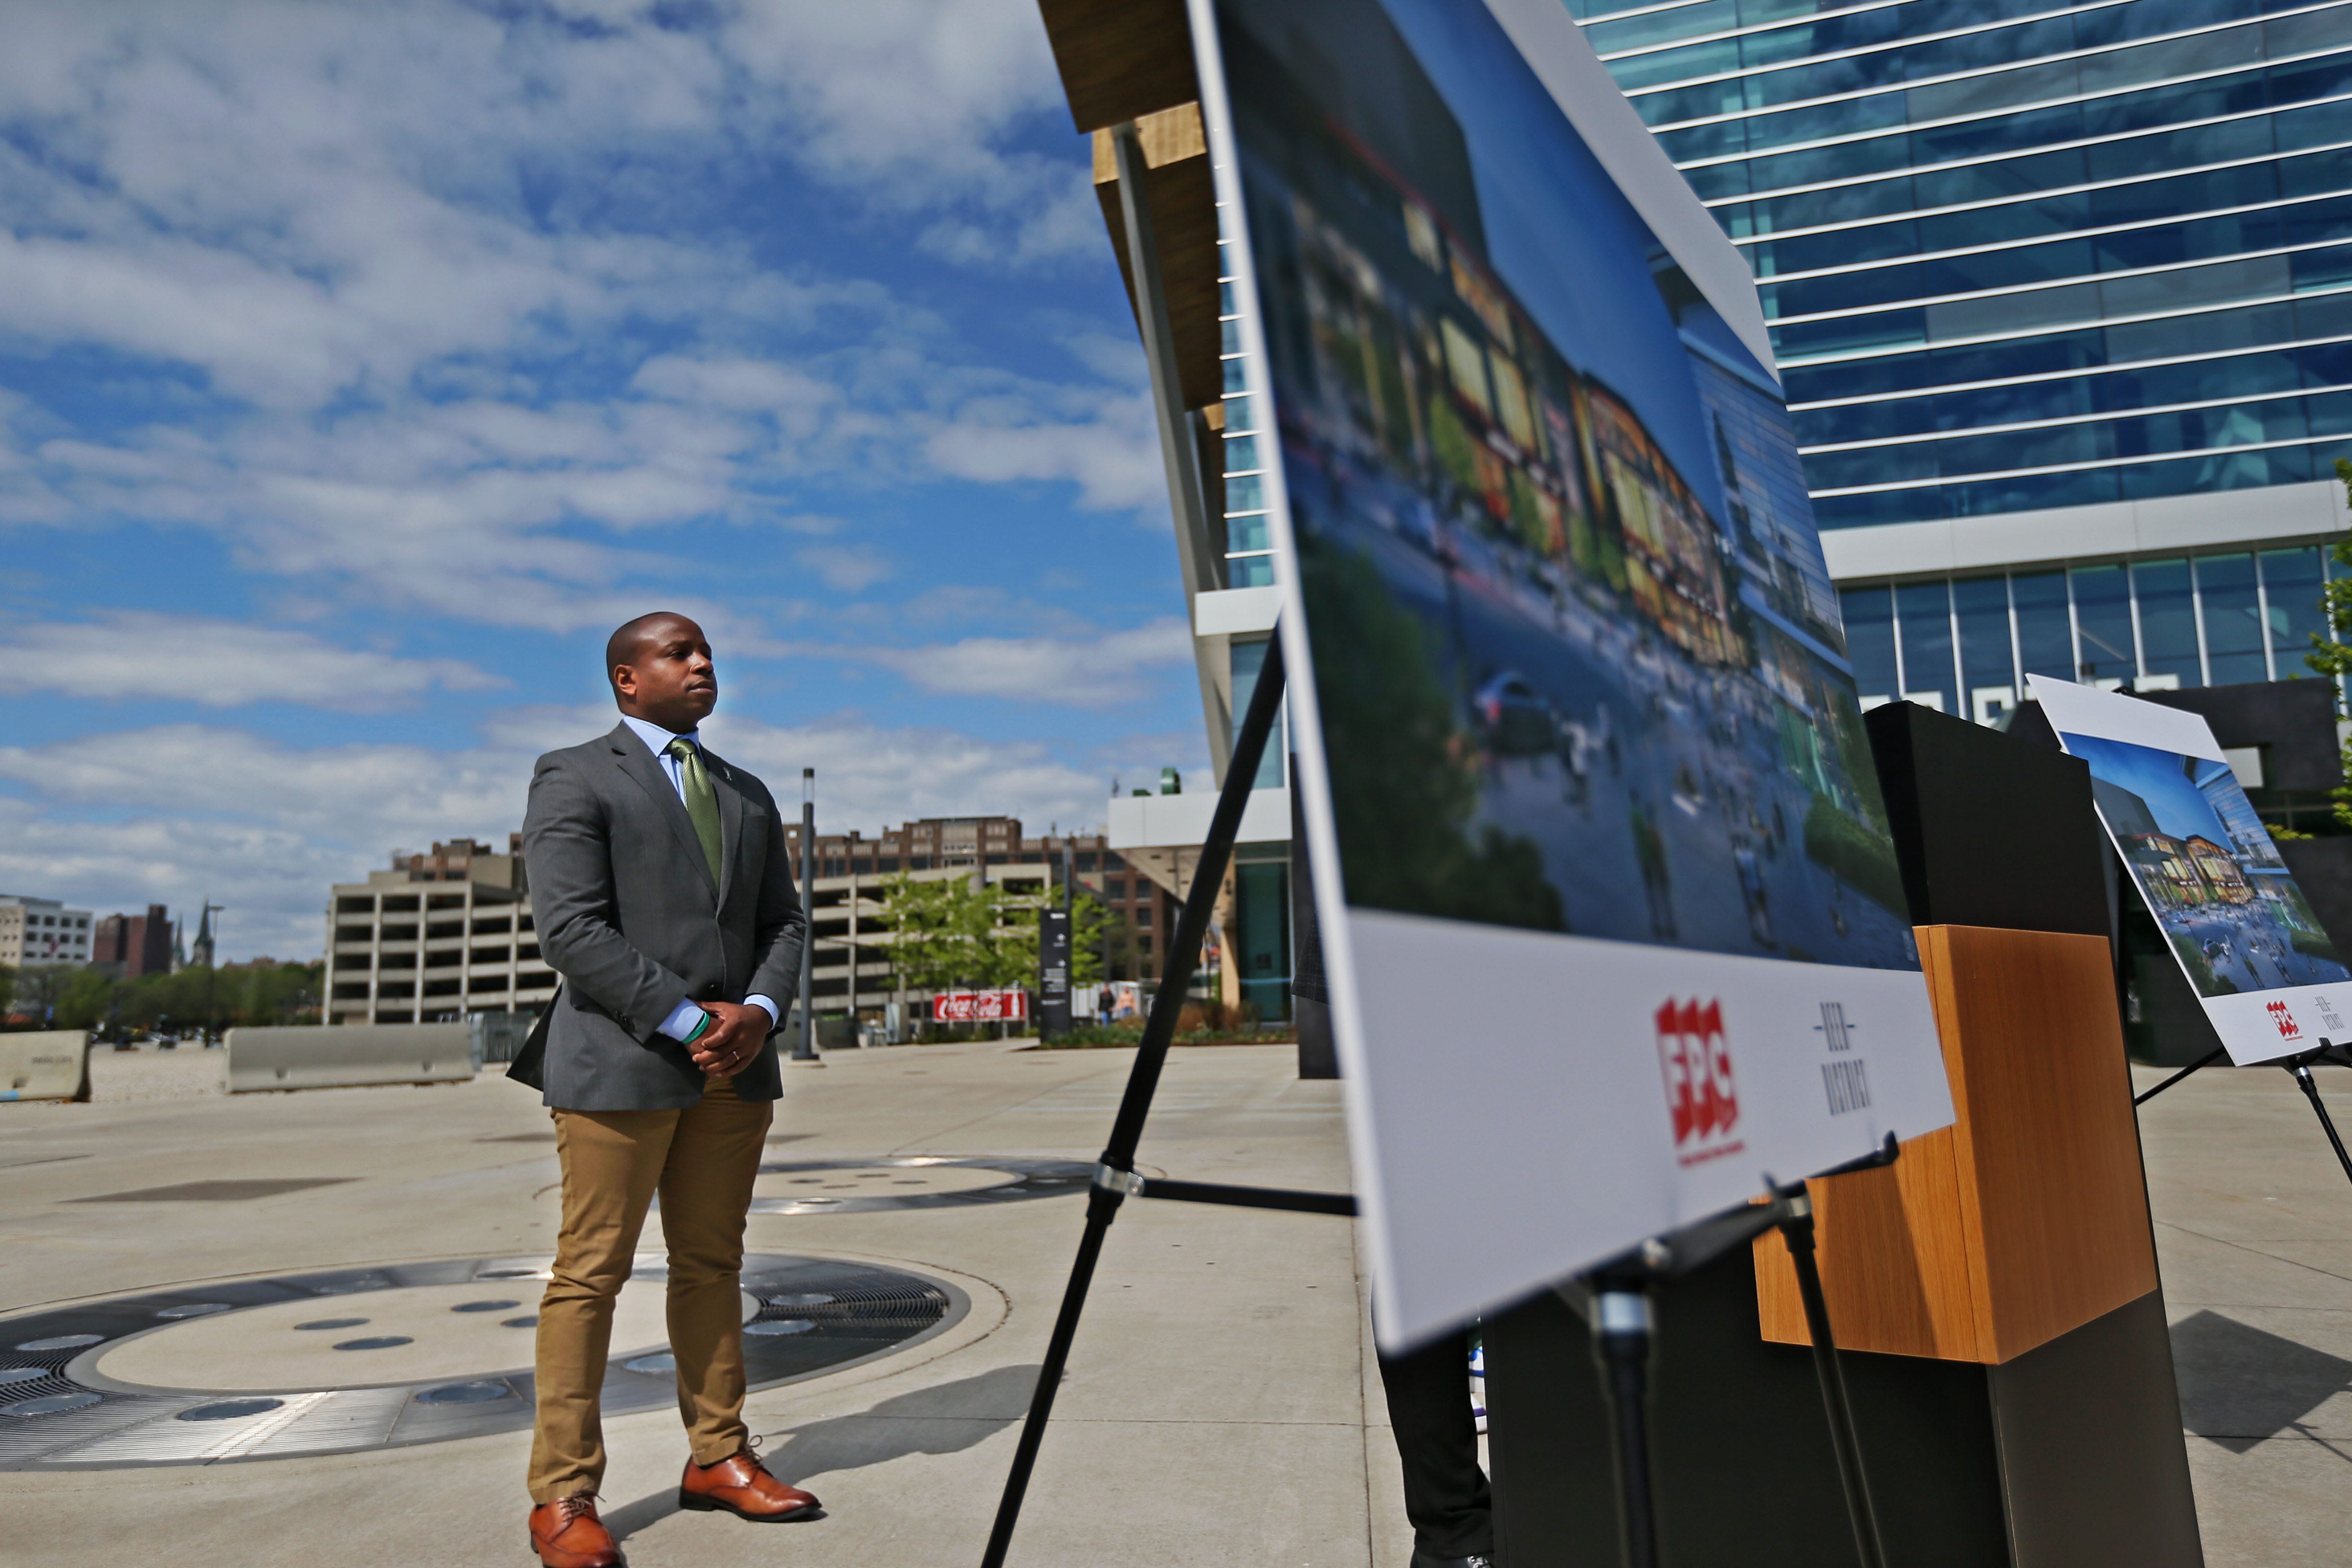 Milwaukee Mayor Cavalier Johnson waits to speak at press conference May 23, at Fiserv Forum where FPC Live announced a proposed plan to develop a new concert venue at the vacant lot where the Bradley Center was demolished in 2019.